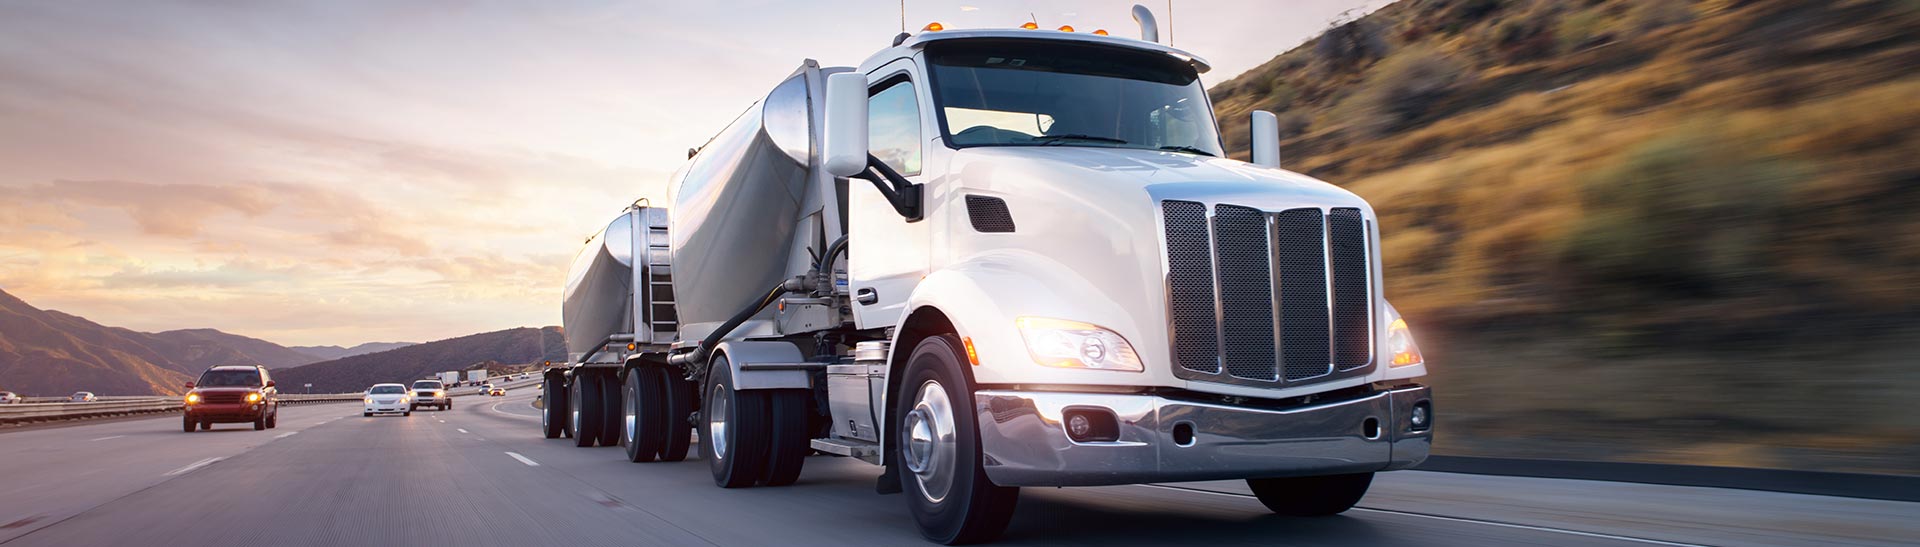 Chatham-Kent Long Haul Trucking, Trucking Services and Trucking Company